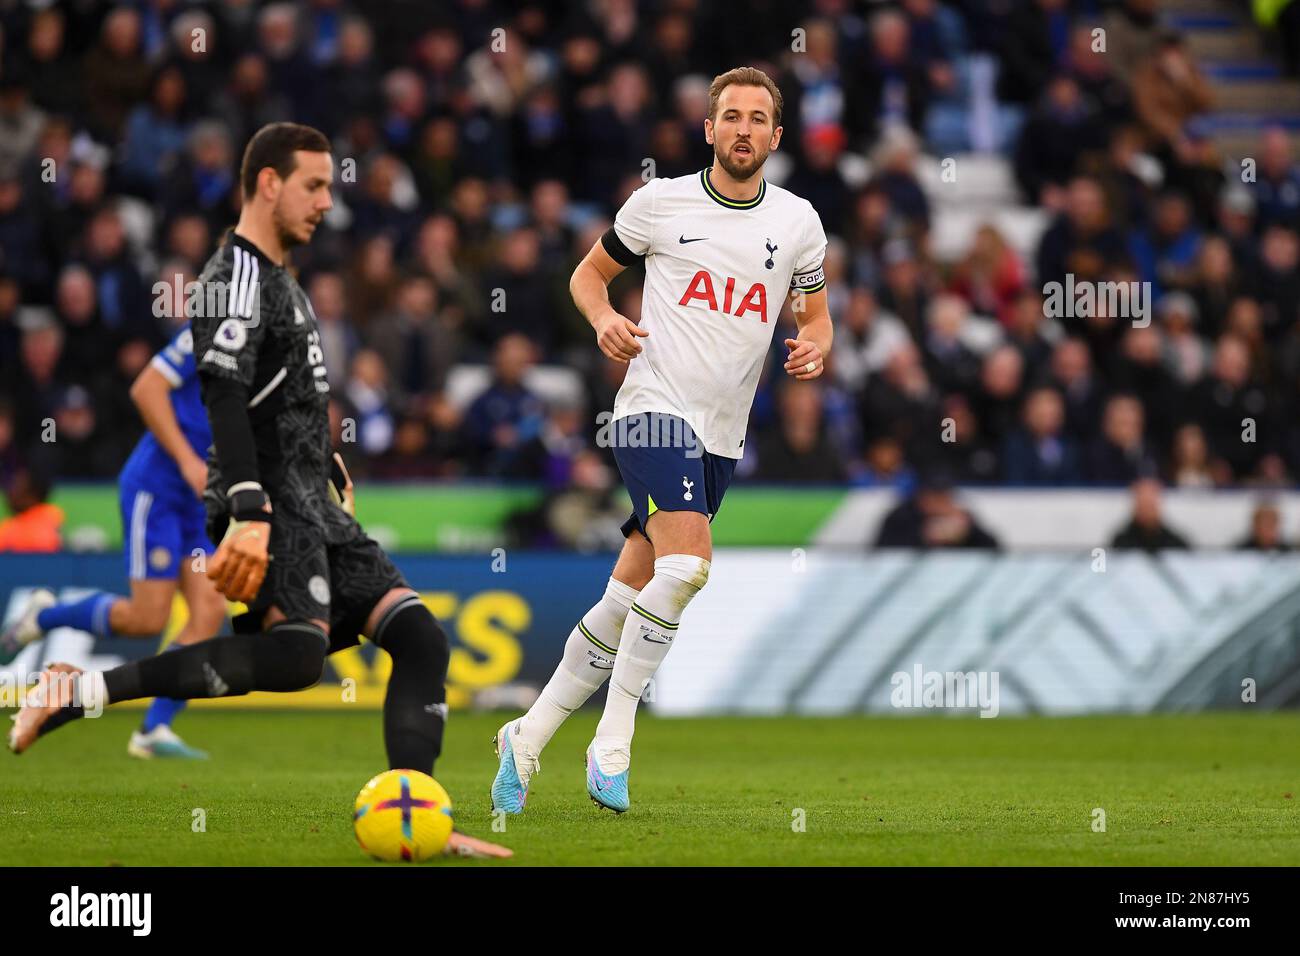 Harry Kane of Tottenham Hotspur puts pressure on Danny Ward of Leicester City during the Premier League match between Leicester City and Tottenham Hotspur at the King Power Stadium, Leicester on Saturday 11th February 2023. (Photo: Jon Hobley | MI News) Credit: MI News & Sport /Alamy Live News Stock Photo